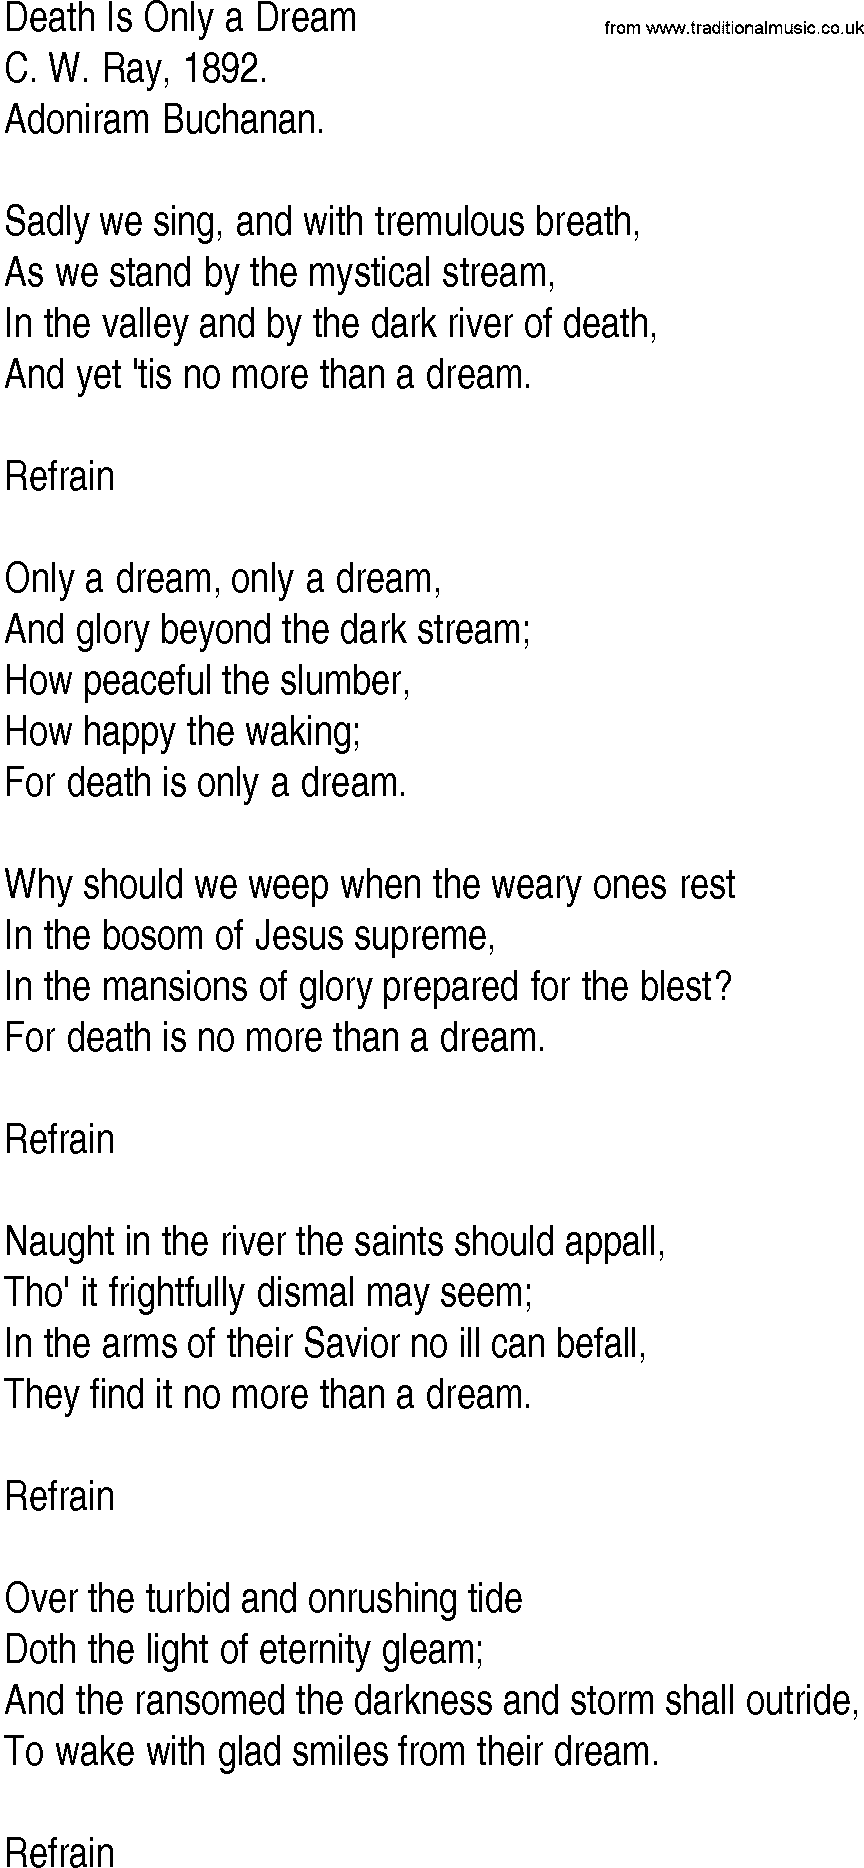 Hymn and Gospel Song: Death Is Only a Dream by C W Ray lyrics